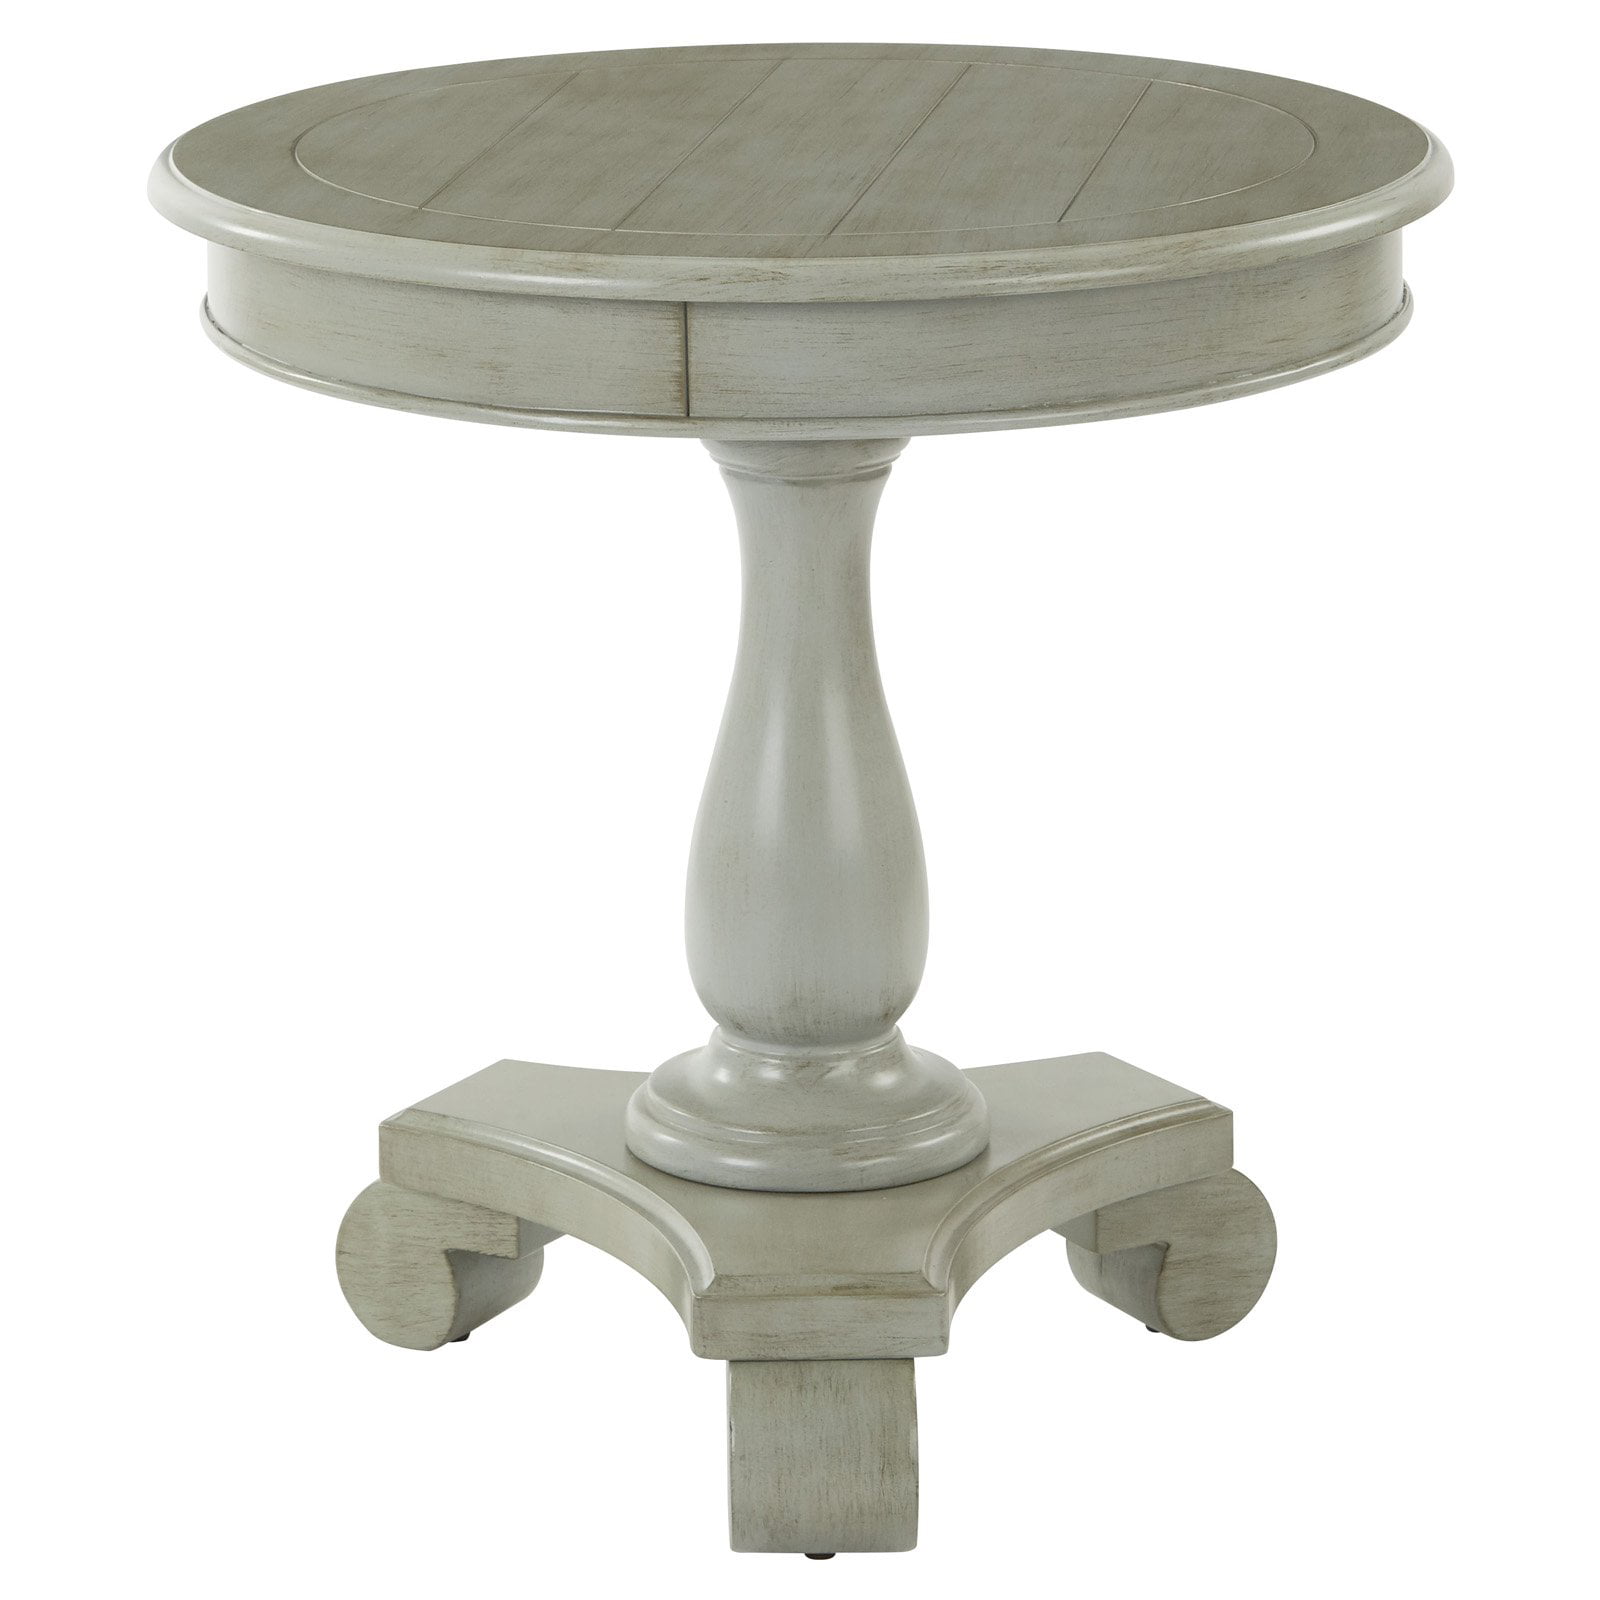 Roundhill Furniture Rene Round Wood Pedestal Side Table, White 